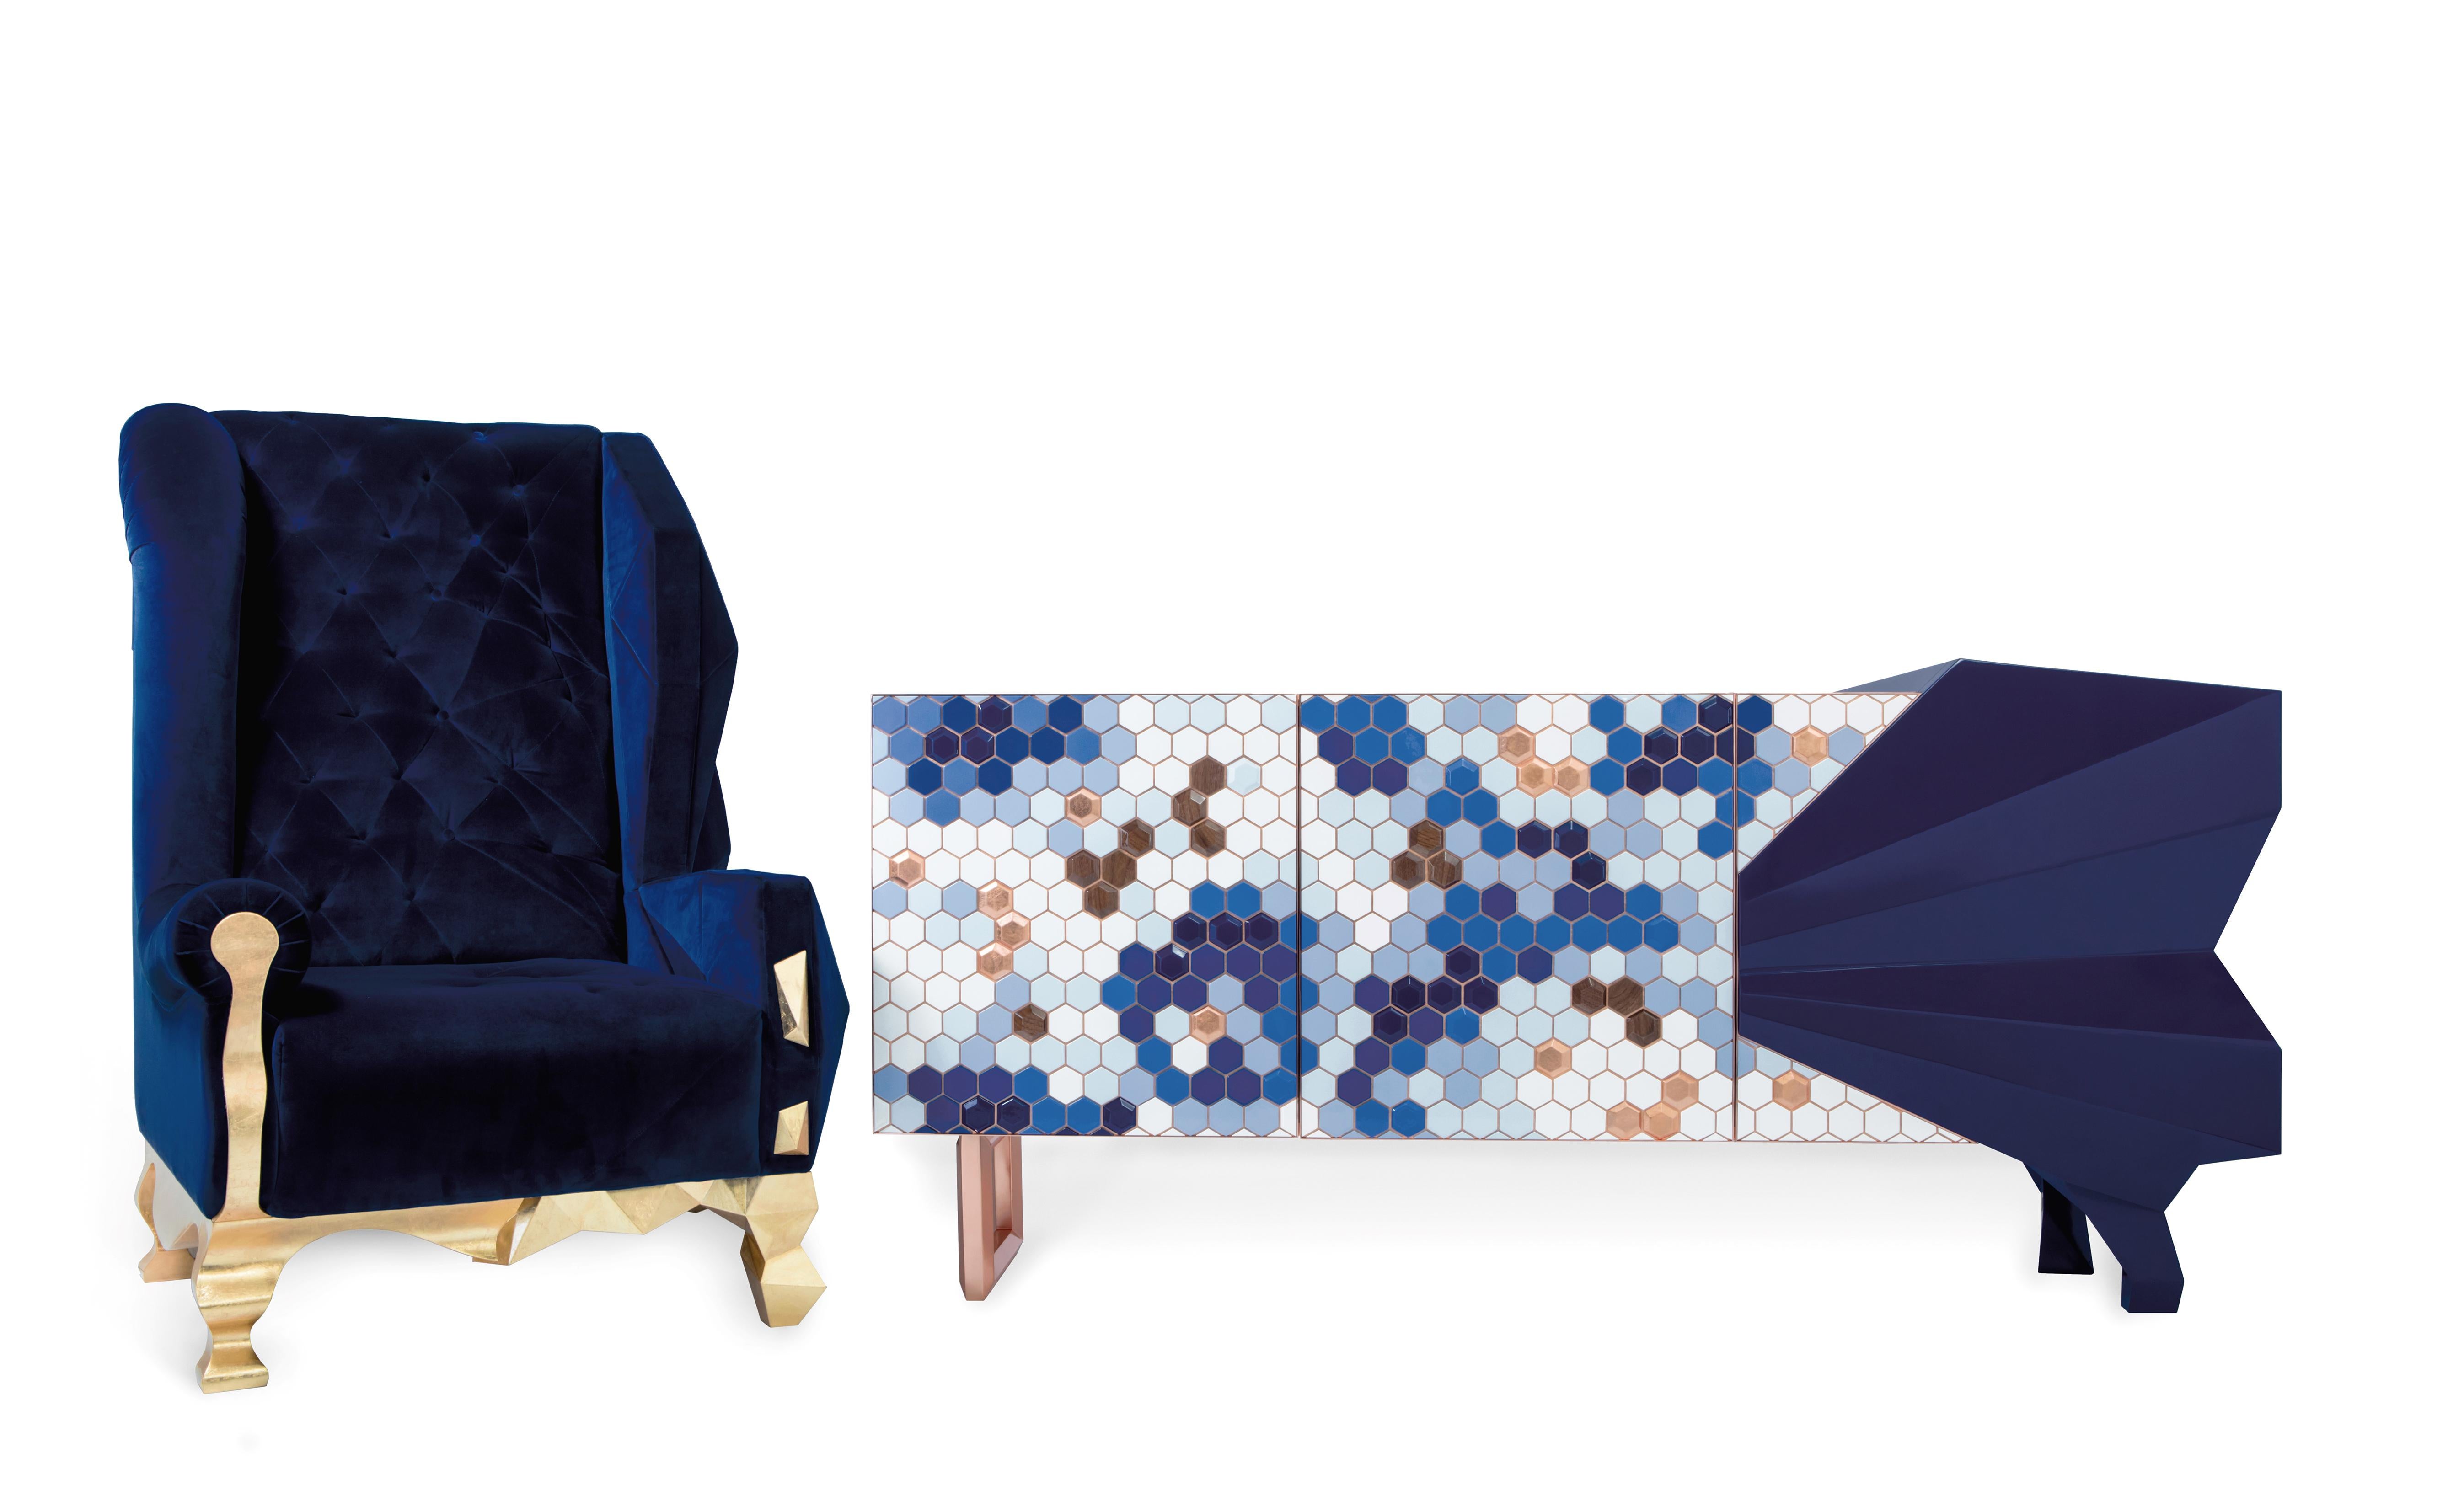 Honeycomb blue sideboard - Royal Stranger
Dimensions: 95 x 201 x 60 cm
Materials: Black Pearl color combination with gold leaf and stainless steel coated in brass.

Inspired by one of the most intrinsic forms of nature, this sideboard transforms